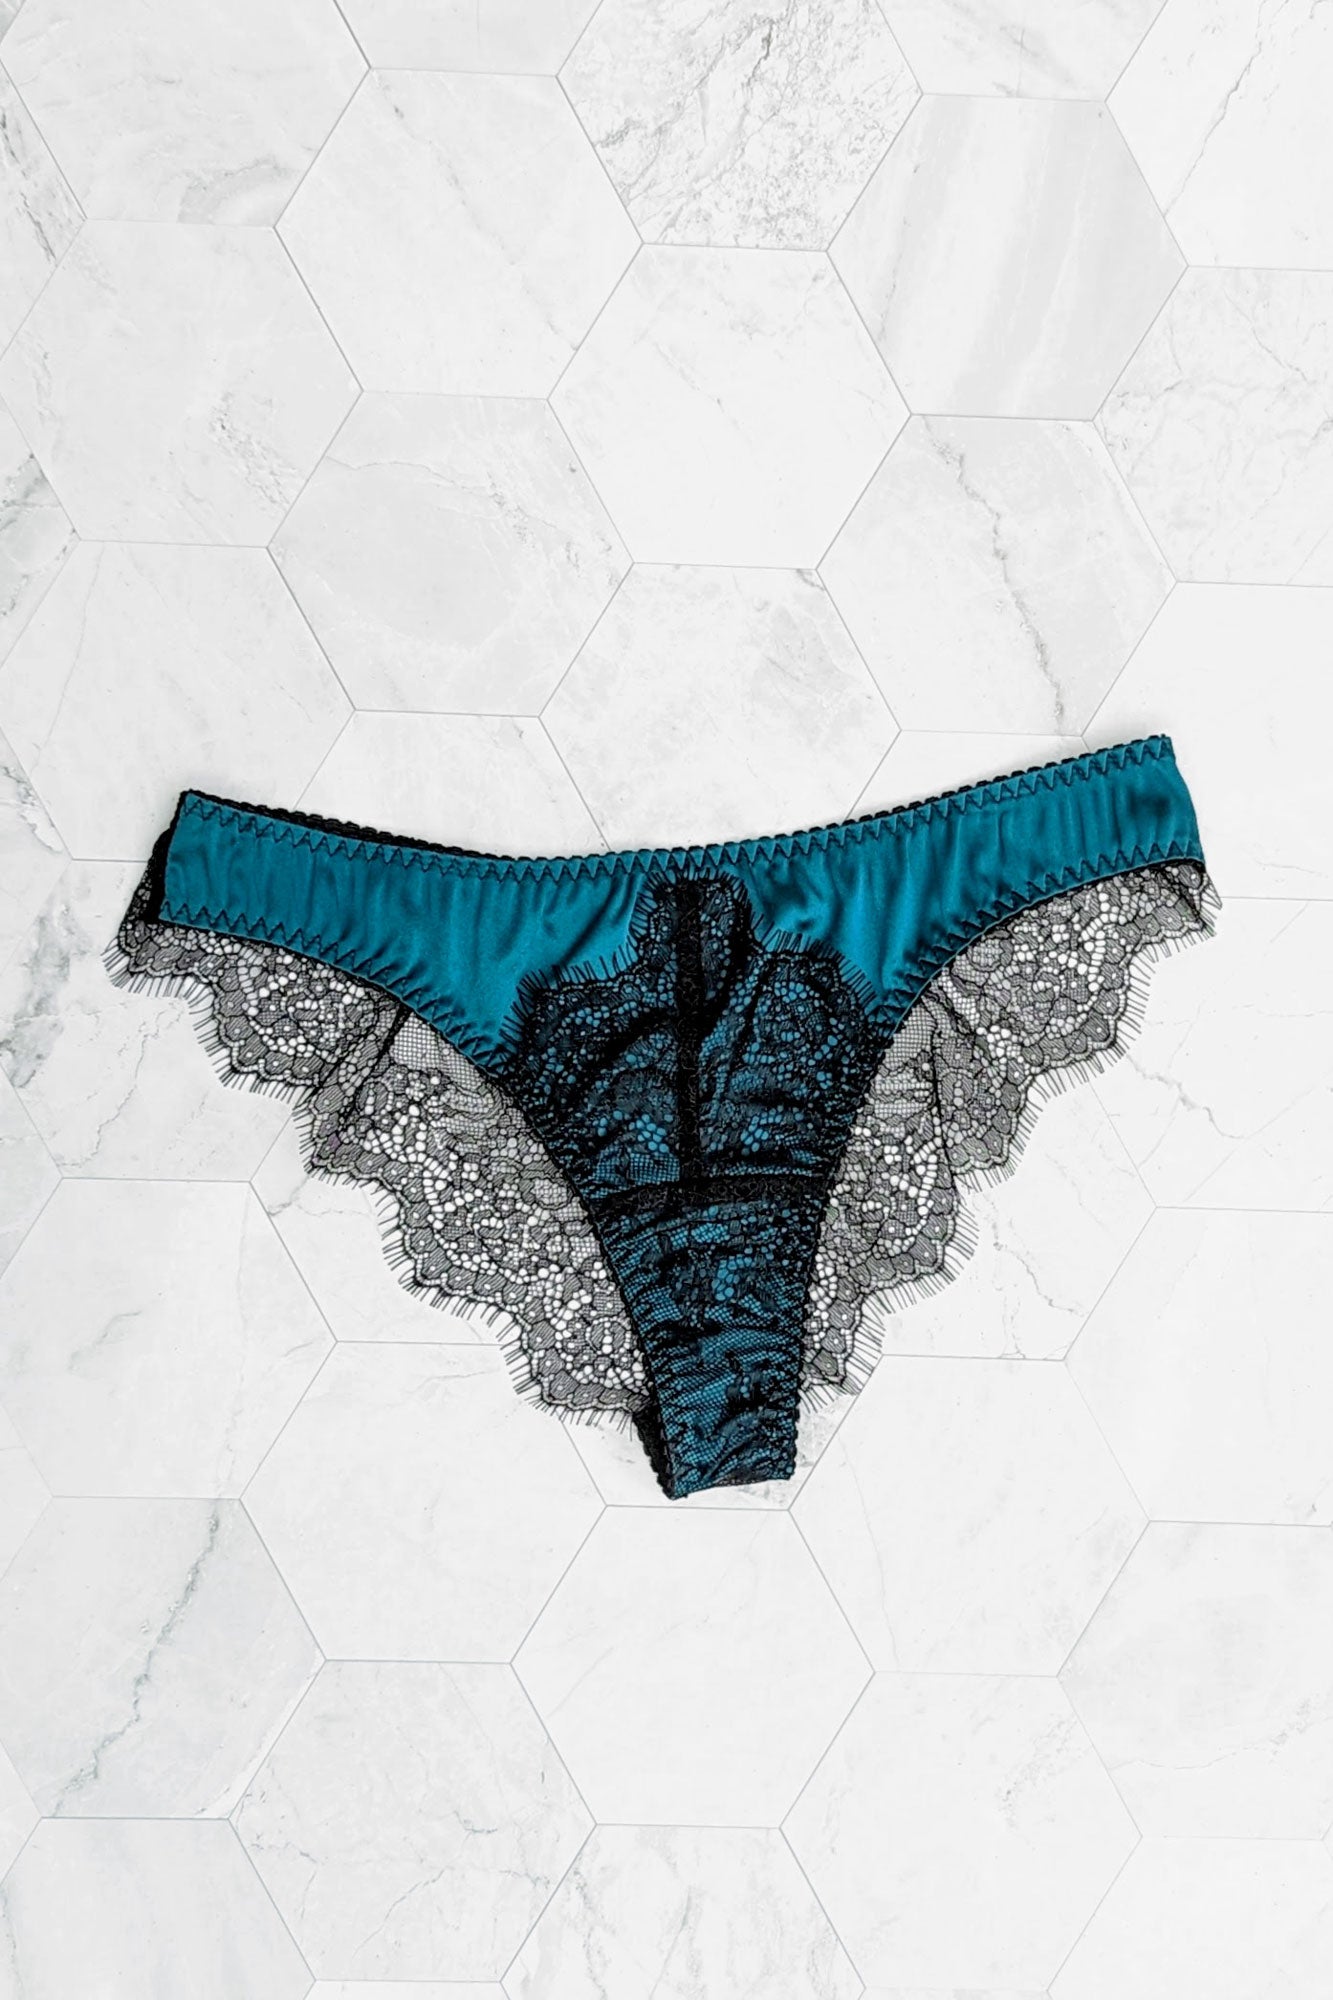 Francesca knickers | Designer underwear sets in silk and lace